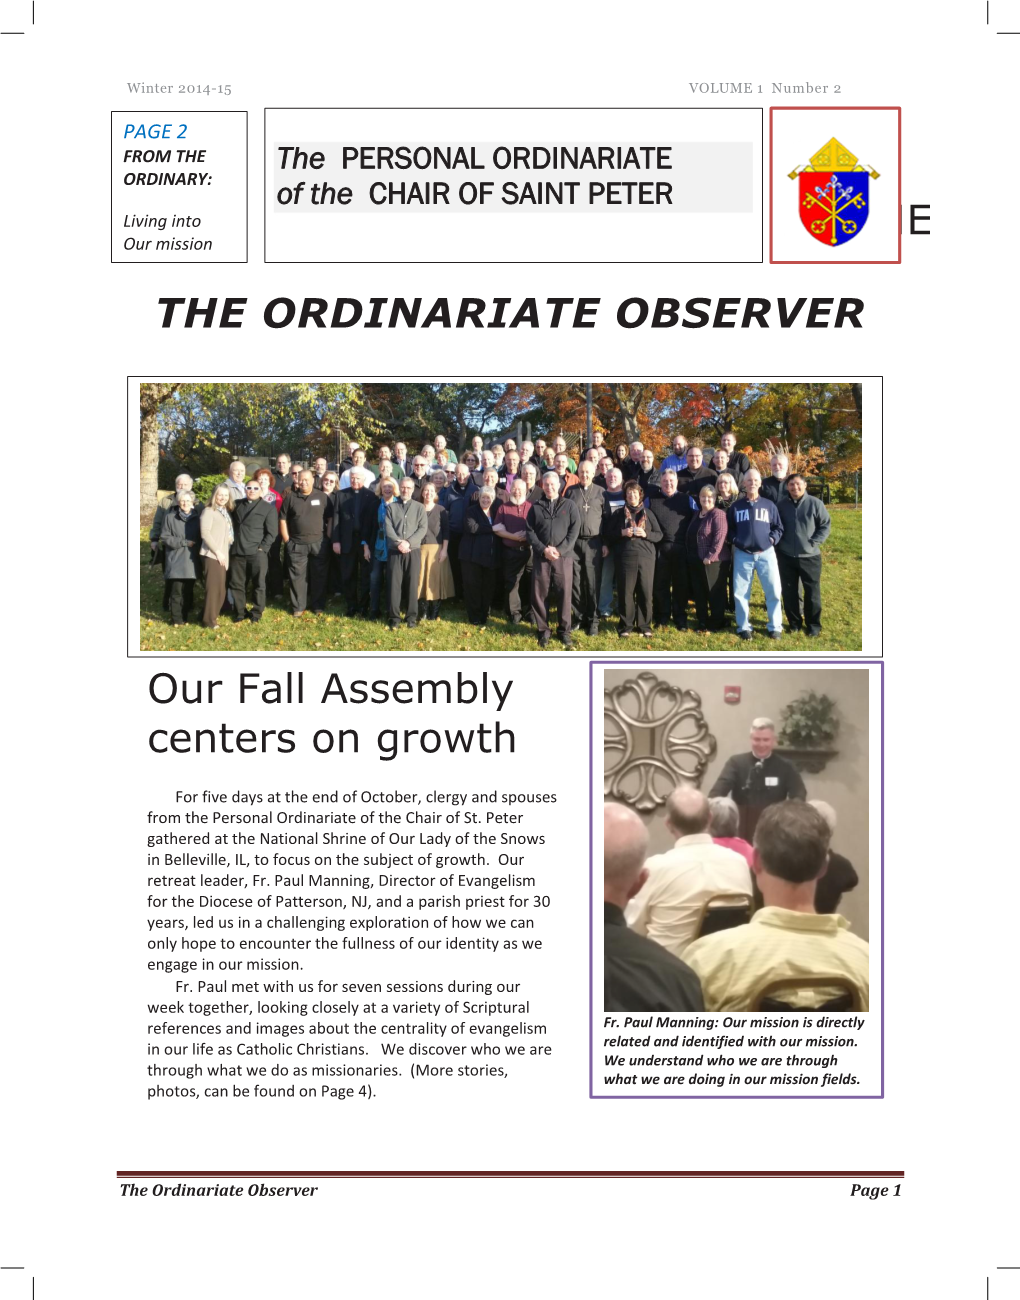 THE the ORDINARIATE OBSERVER Our Fall Assembly Centers on Growth